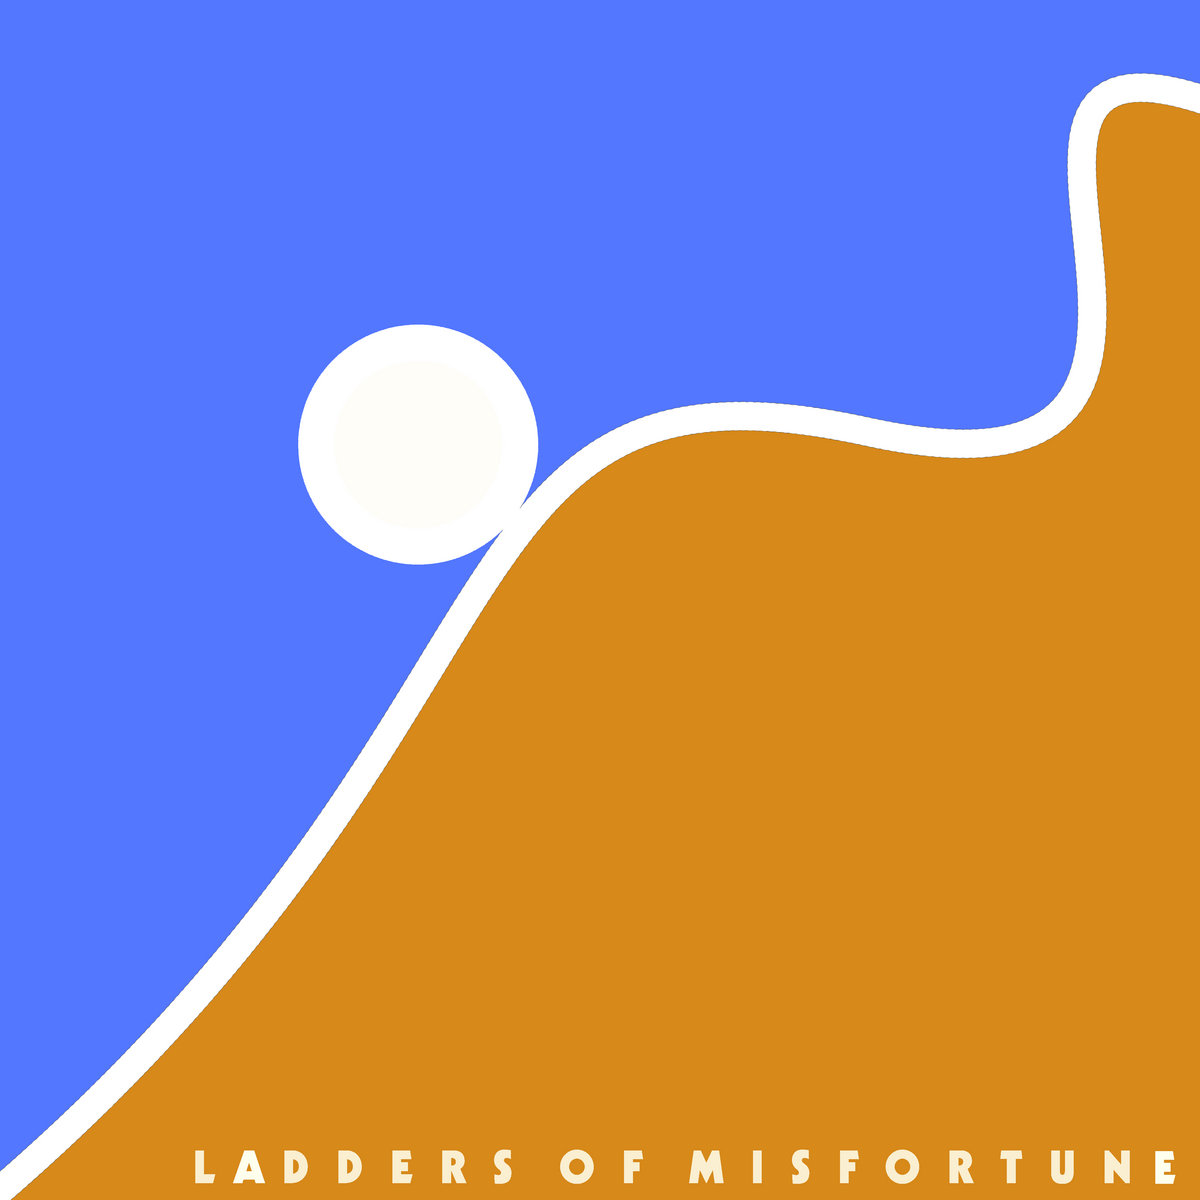 Introducing: Conflict at Serenity Pools – Ladders of Misfortune & 3 Qs